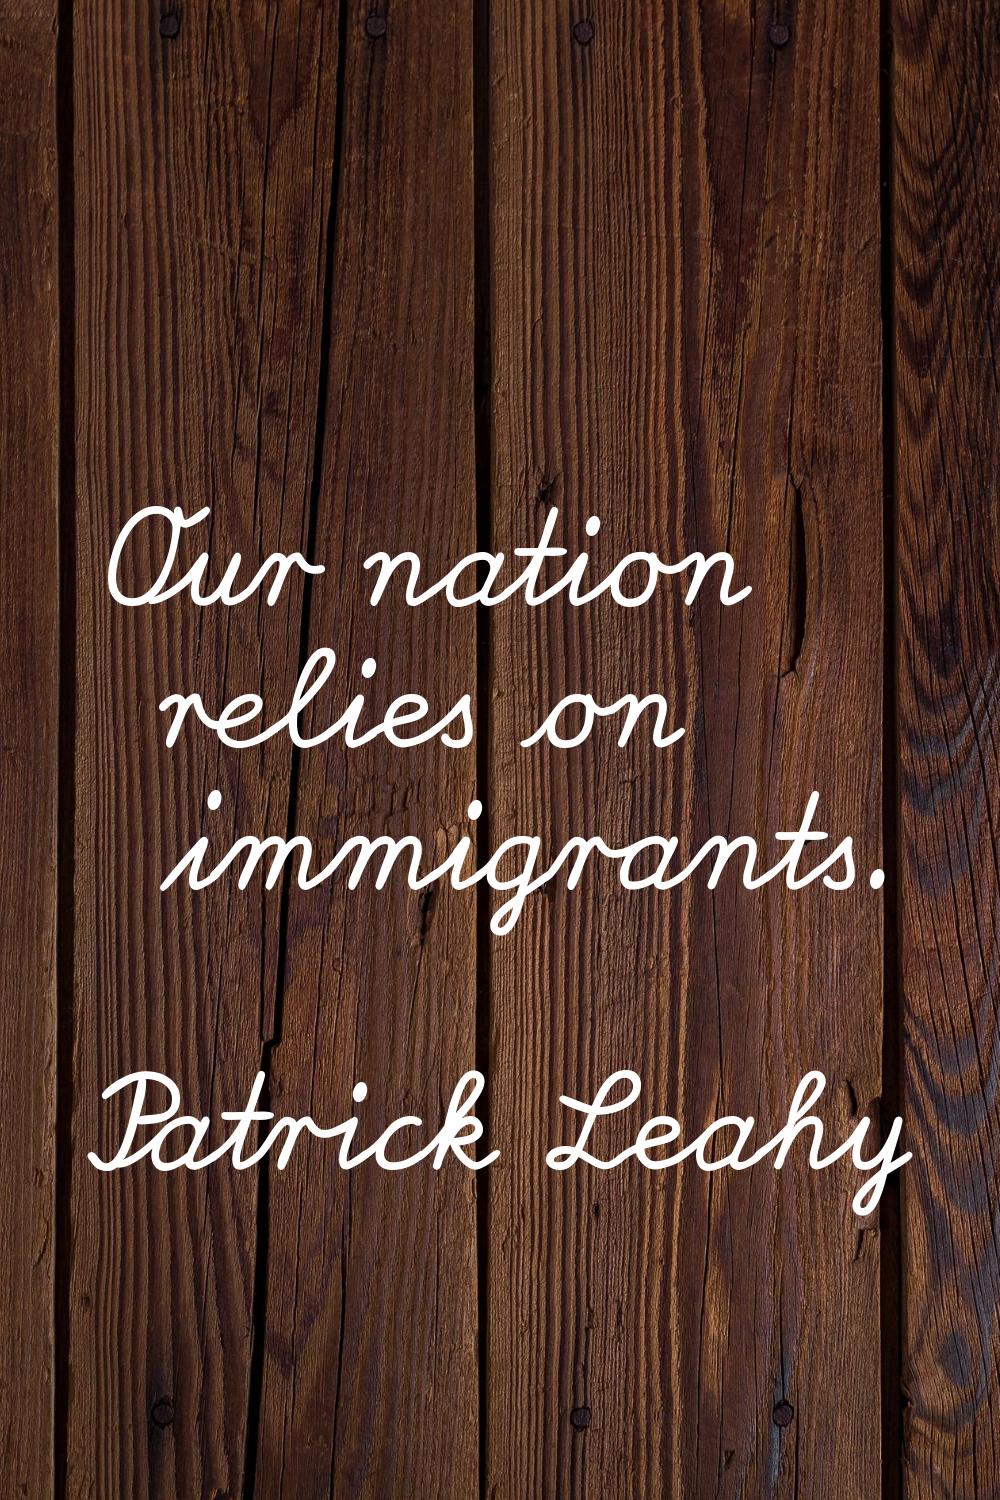 Our nation relies on immigrants.